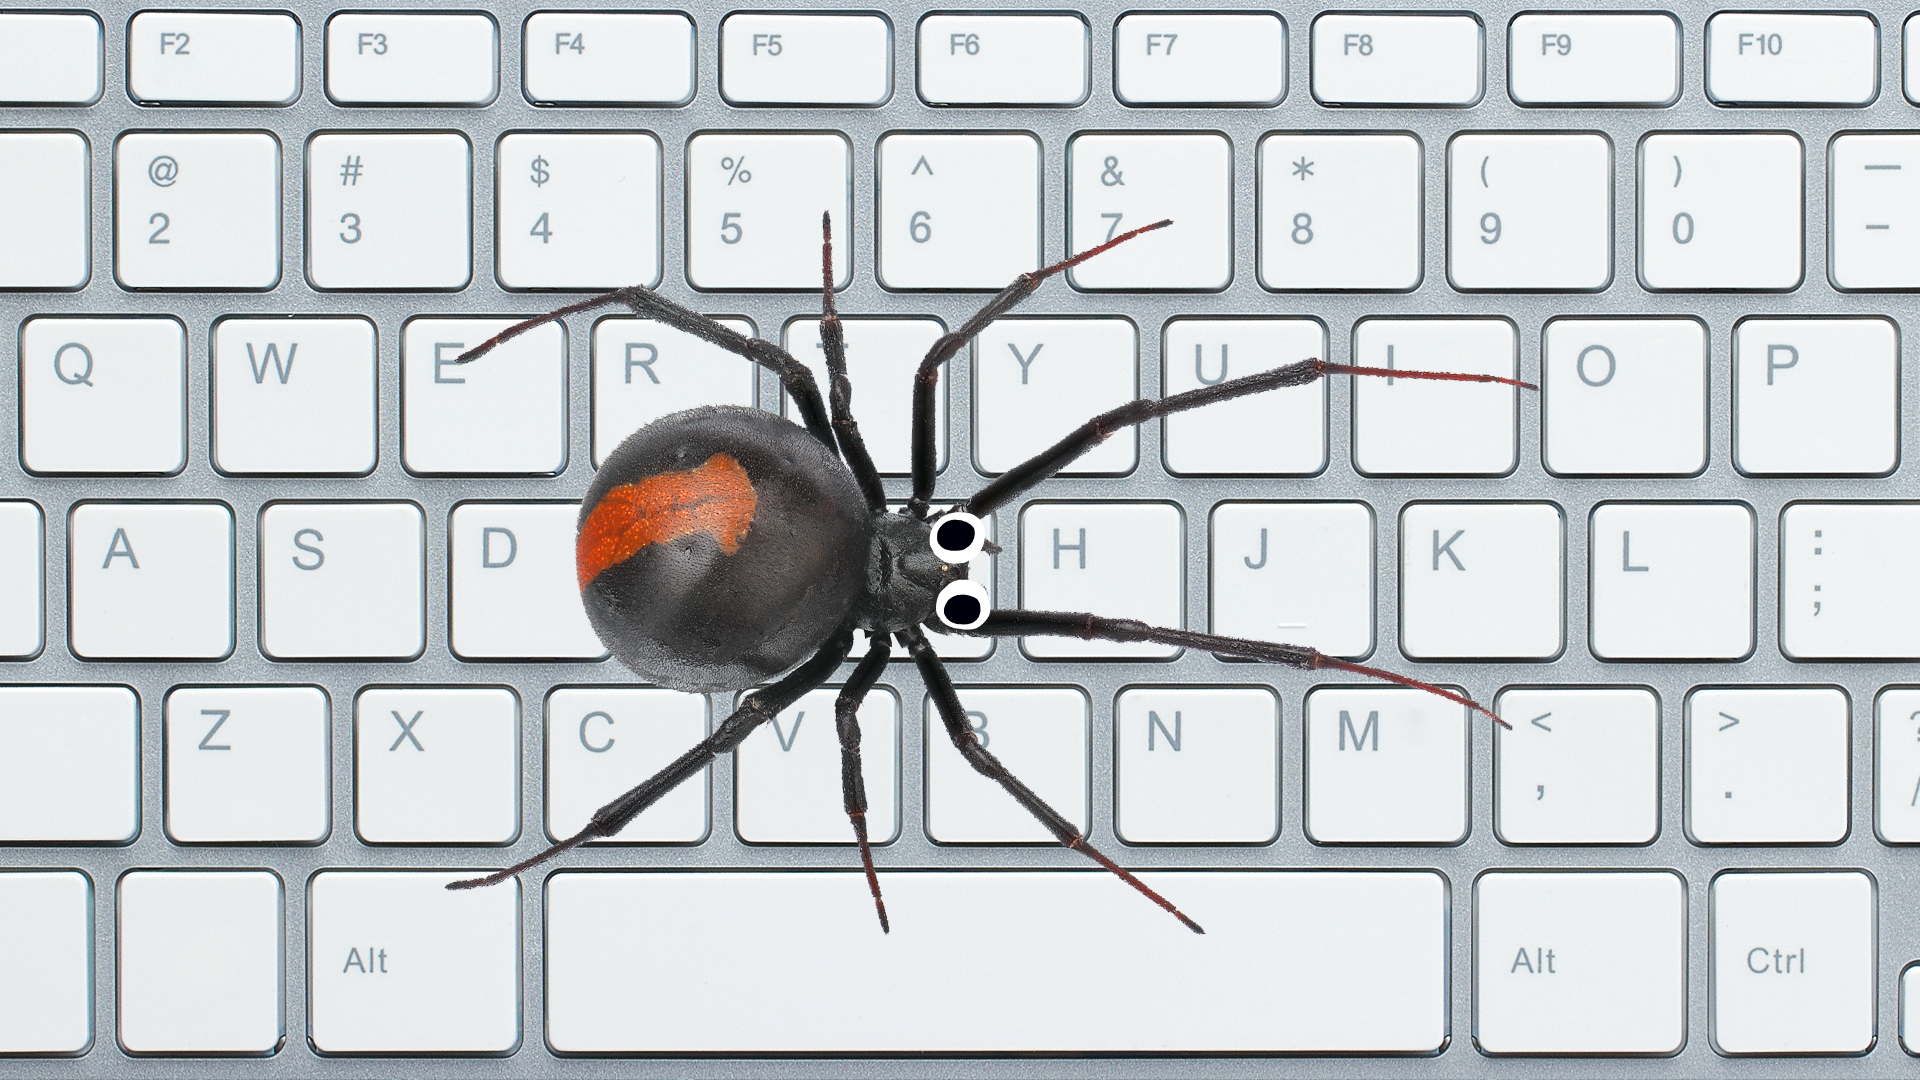 A spider on a keyboard